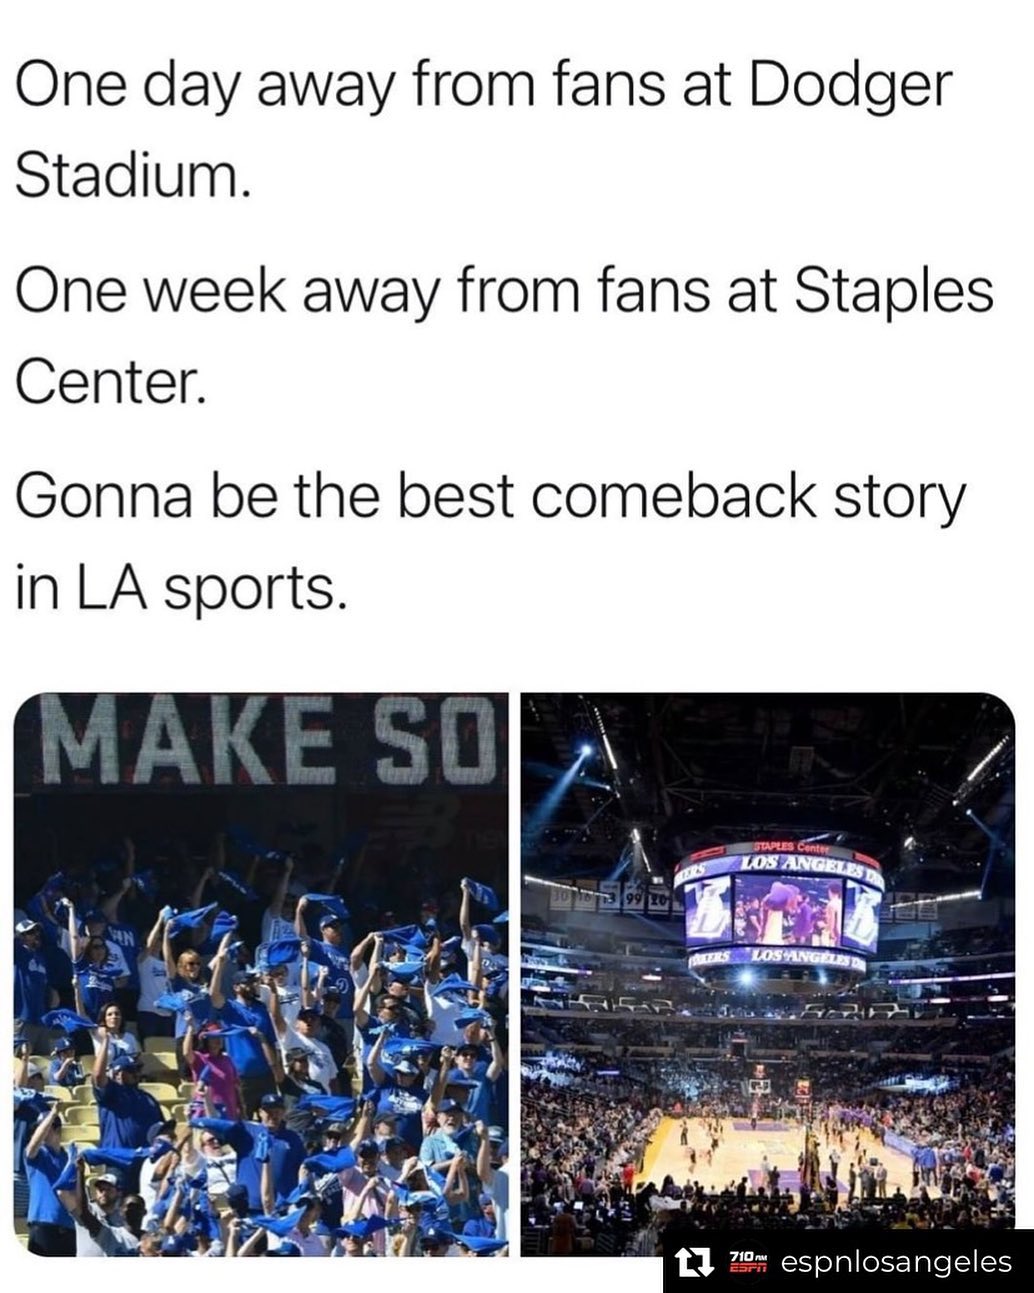 And 9 more days til LAFC plays Austin with partial fans! We back LA! I’ll join in on the fun in August though lol, Imma wait it out but it’ll be nice to see happy fans in the stadiums again! 

Repost from @espnlosangeles
•
We can't wait to celebrate together again with you  The celebration never stops on 710 AM ESPN